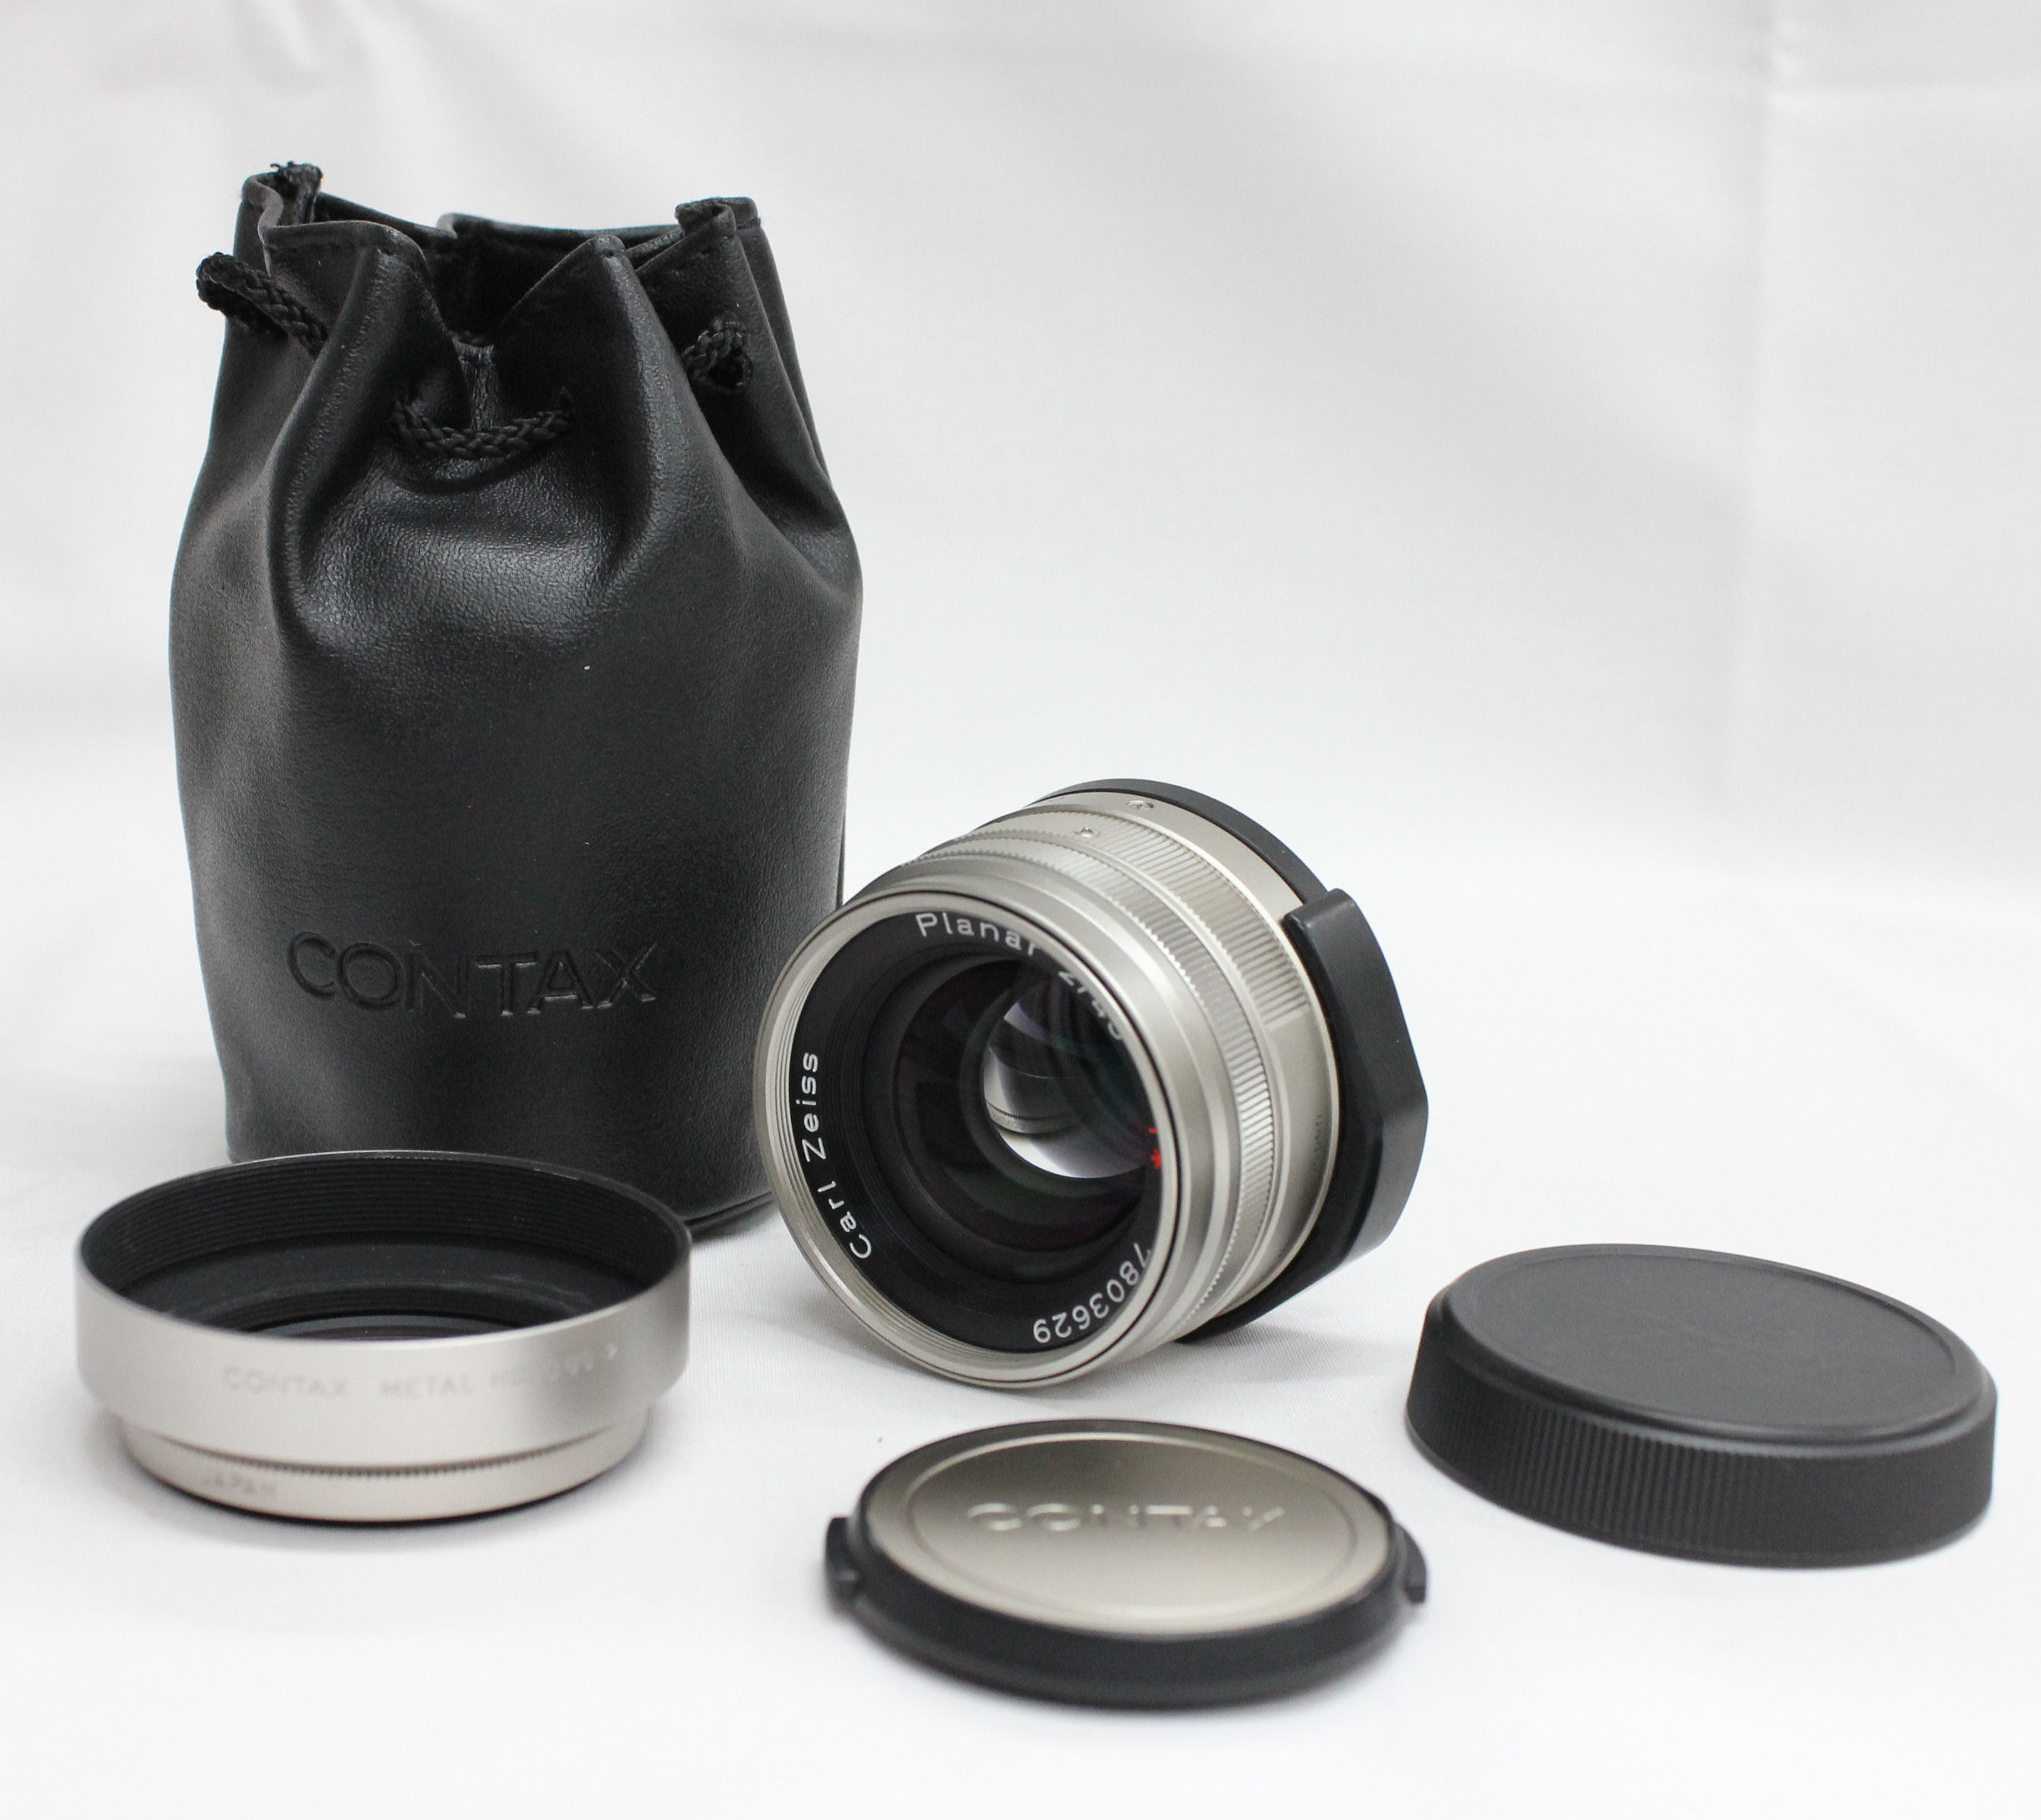 [Mint] CONTAX Carl Zeiss Planar T* 45mm f/2 for G1 G2 w/ HOOD & Case from Japan